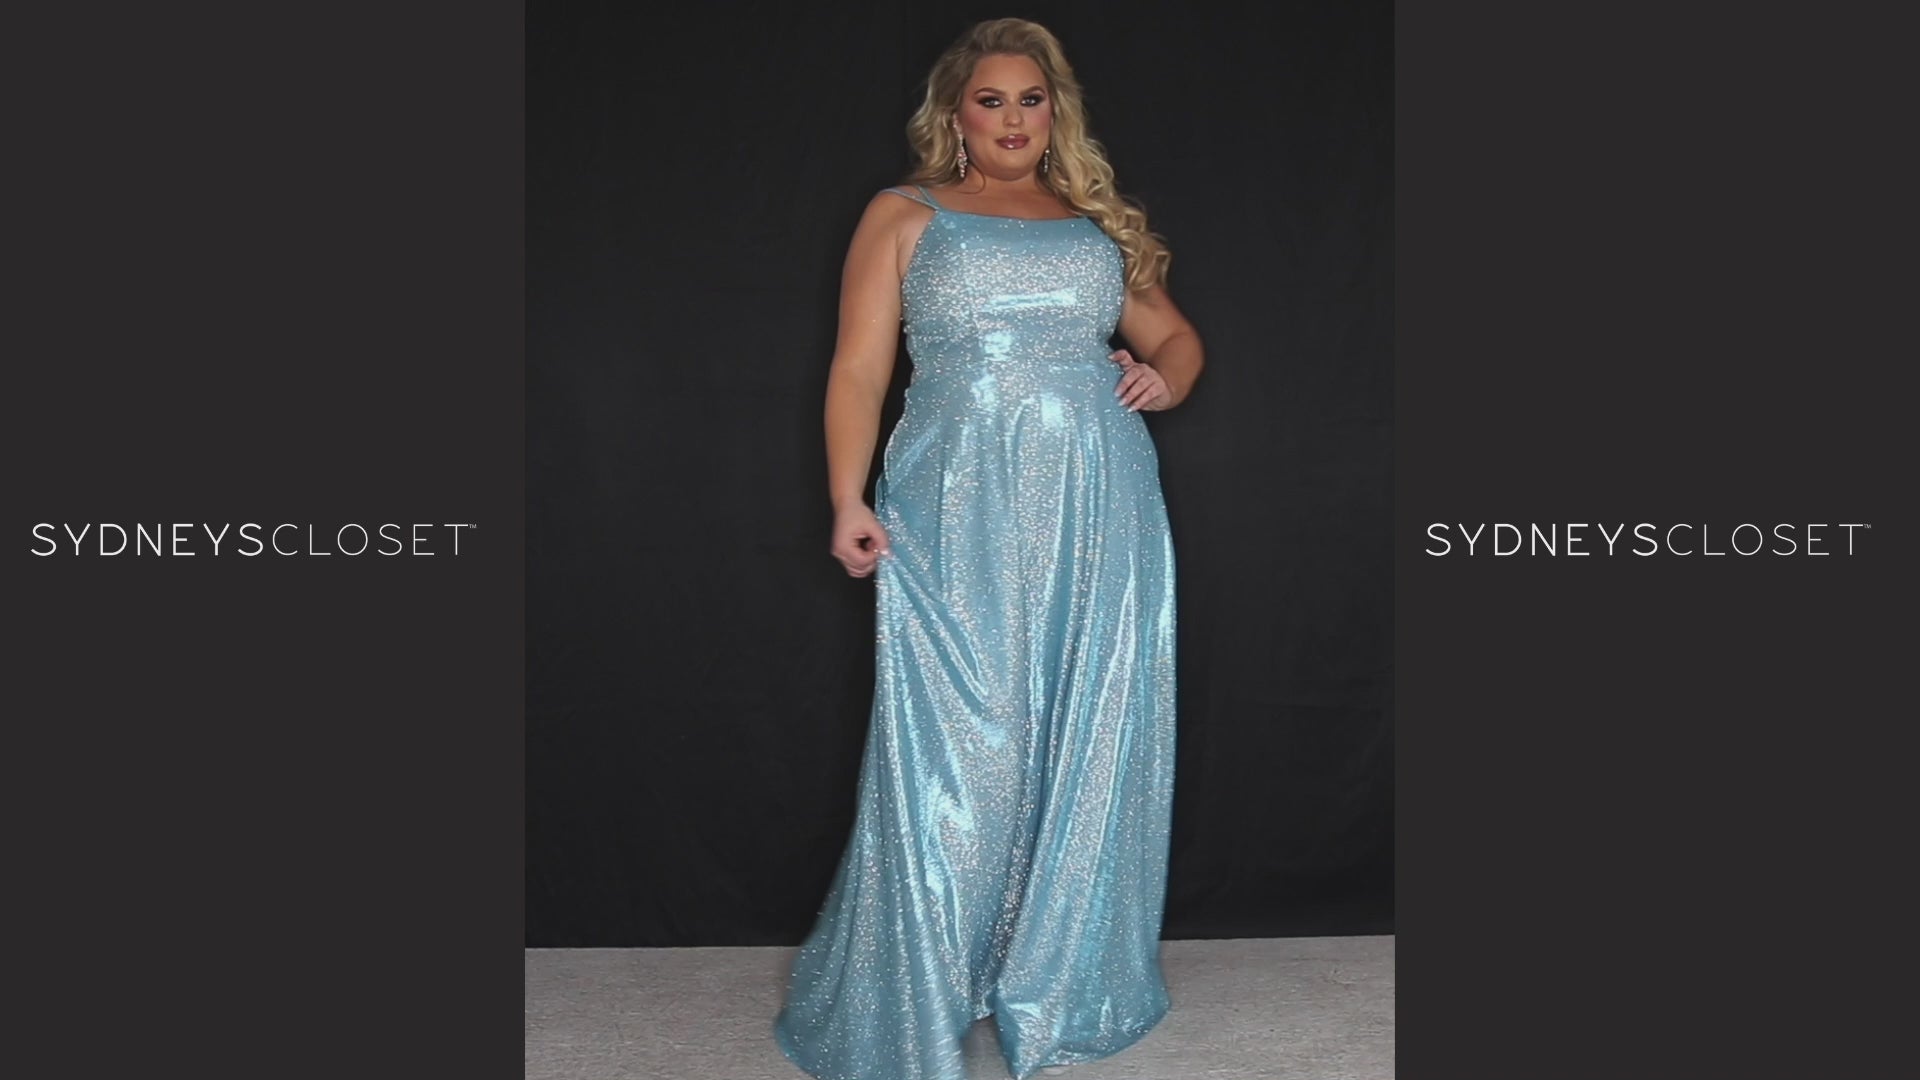 Sydney’s Closet SC7349 in purple . Full A-line silhouette with a scoop neckline and double straps. Shimmer knit offered in pink, orange, purple and aqua blue. An A-line skirt with pockets and a left leg slit. Is fully lined, has a natural waist and a long invisible zipper.